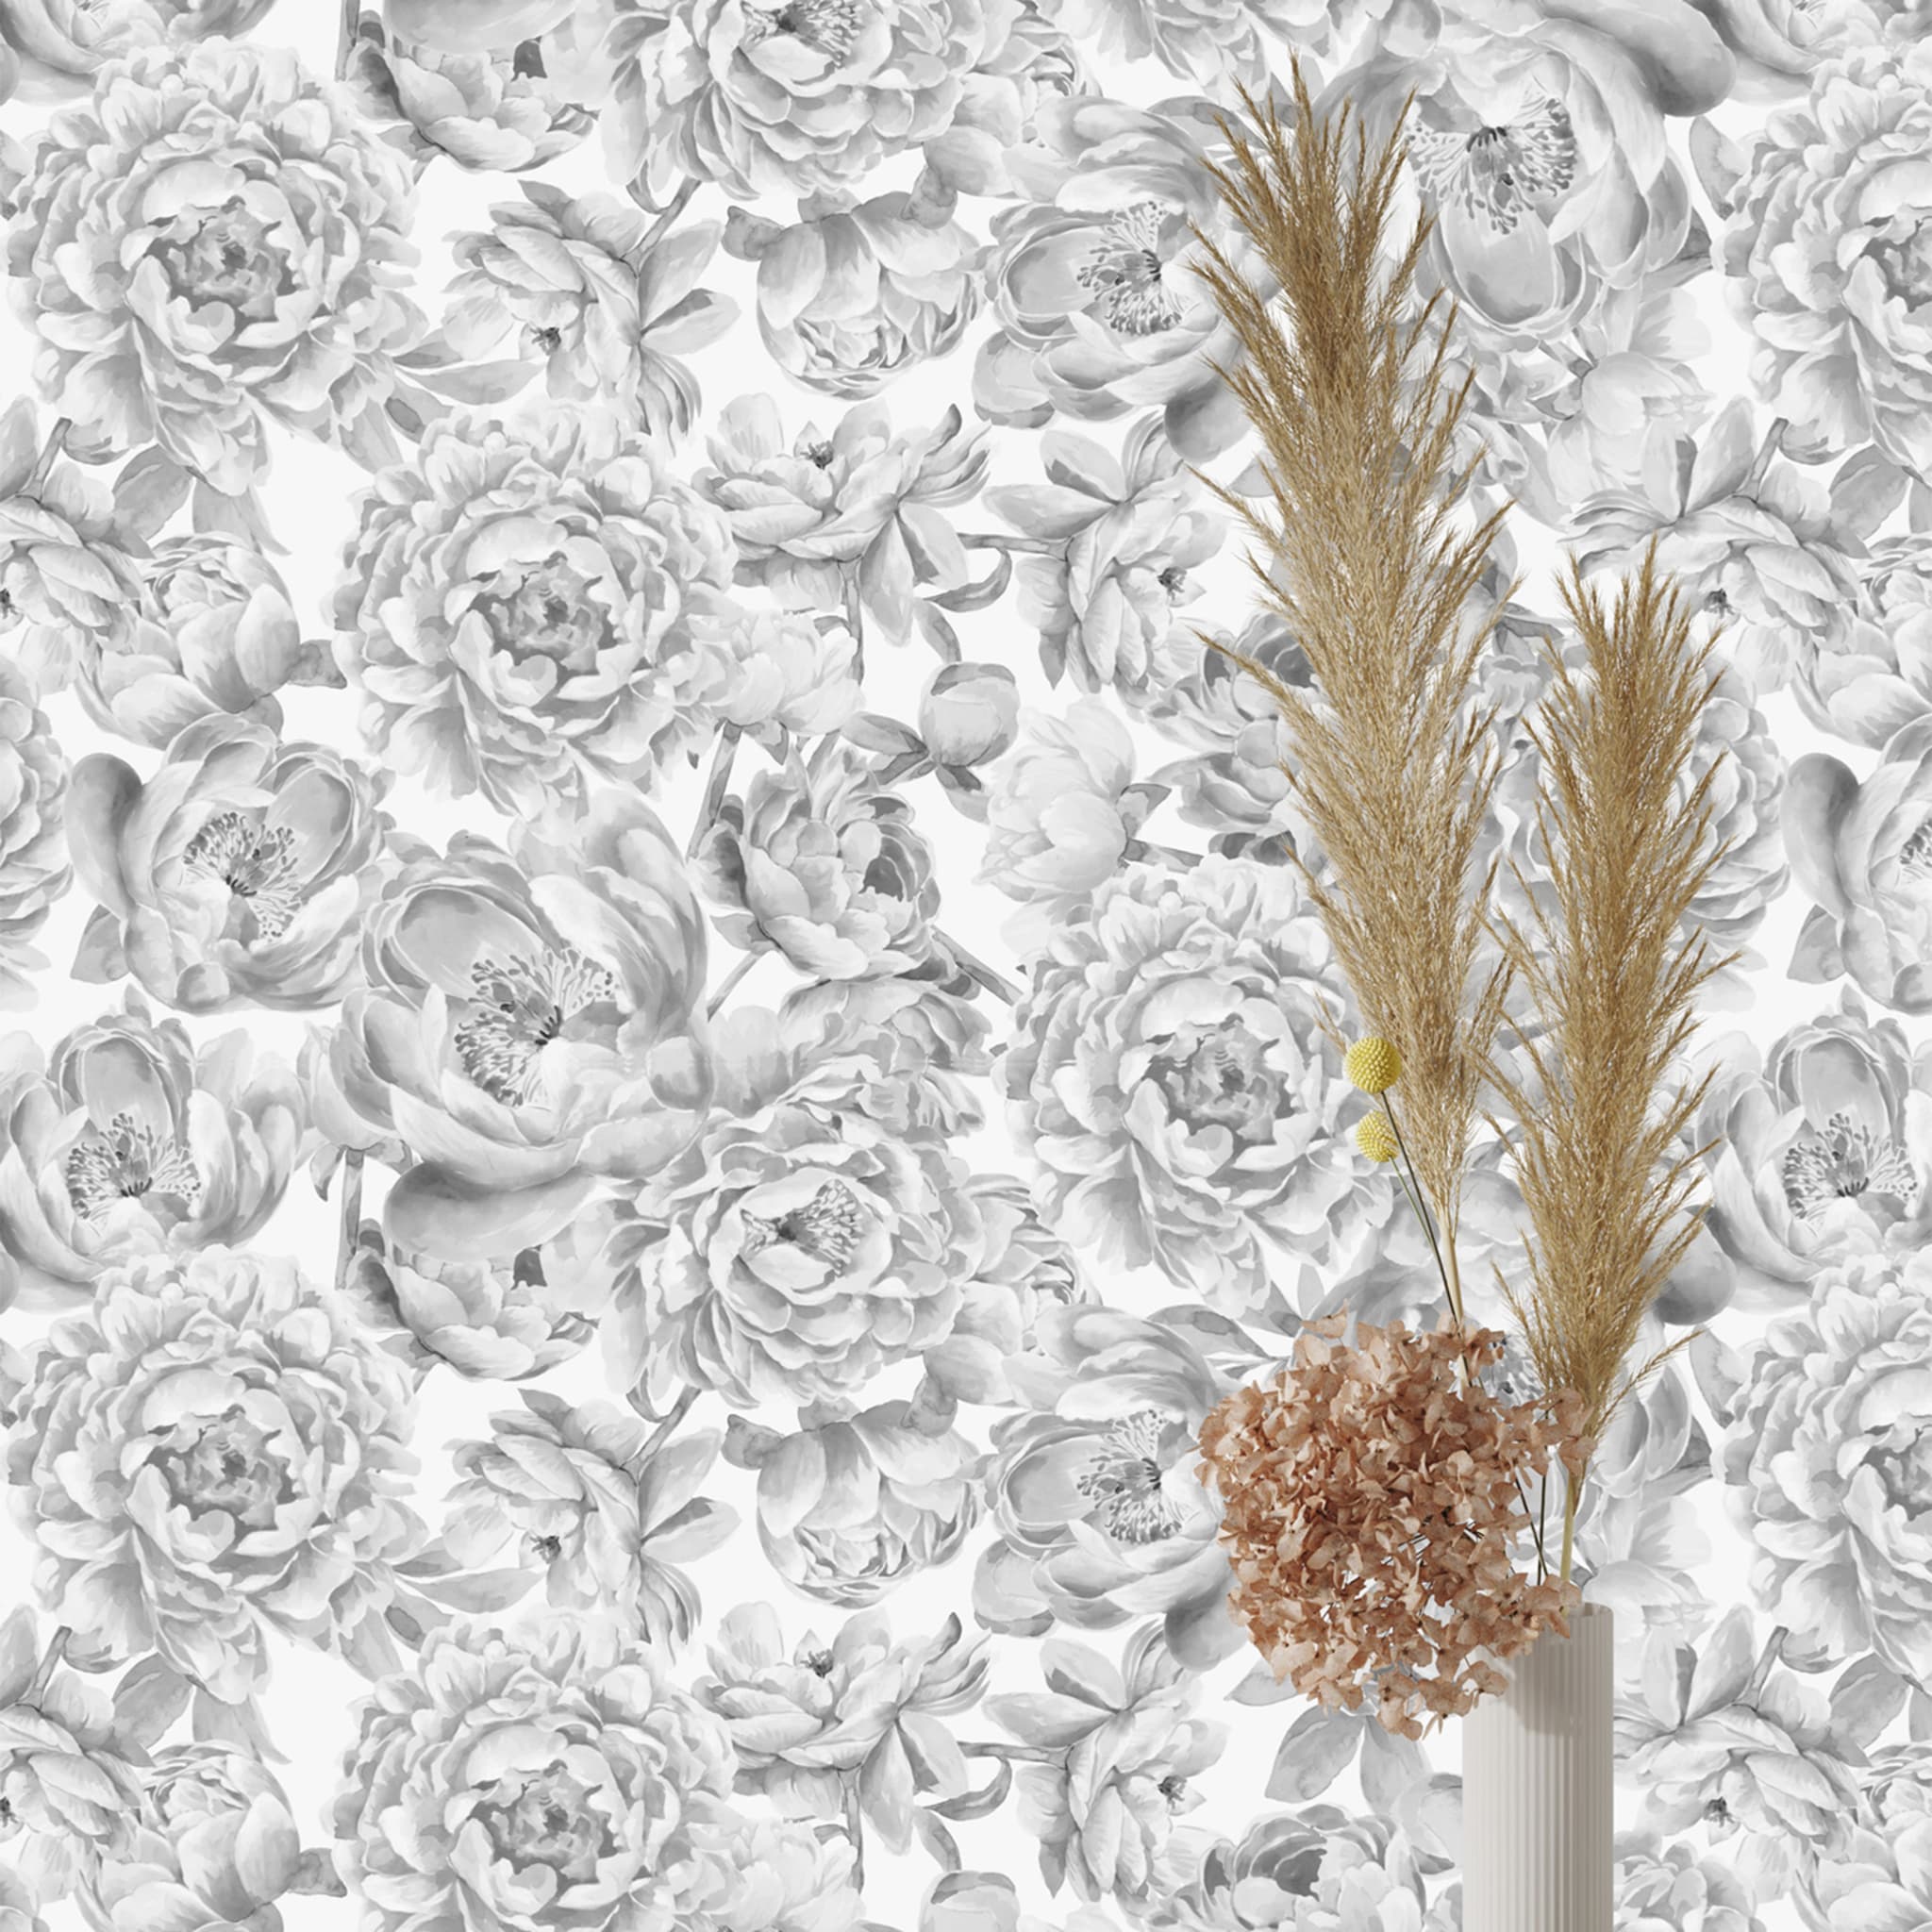 Black and White Monochromatic Floral Peony Wallpaper - Alternative view 1